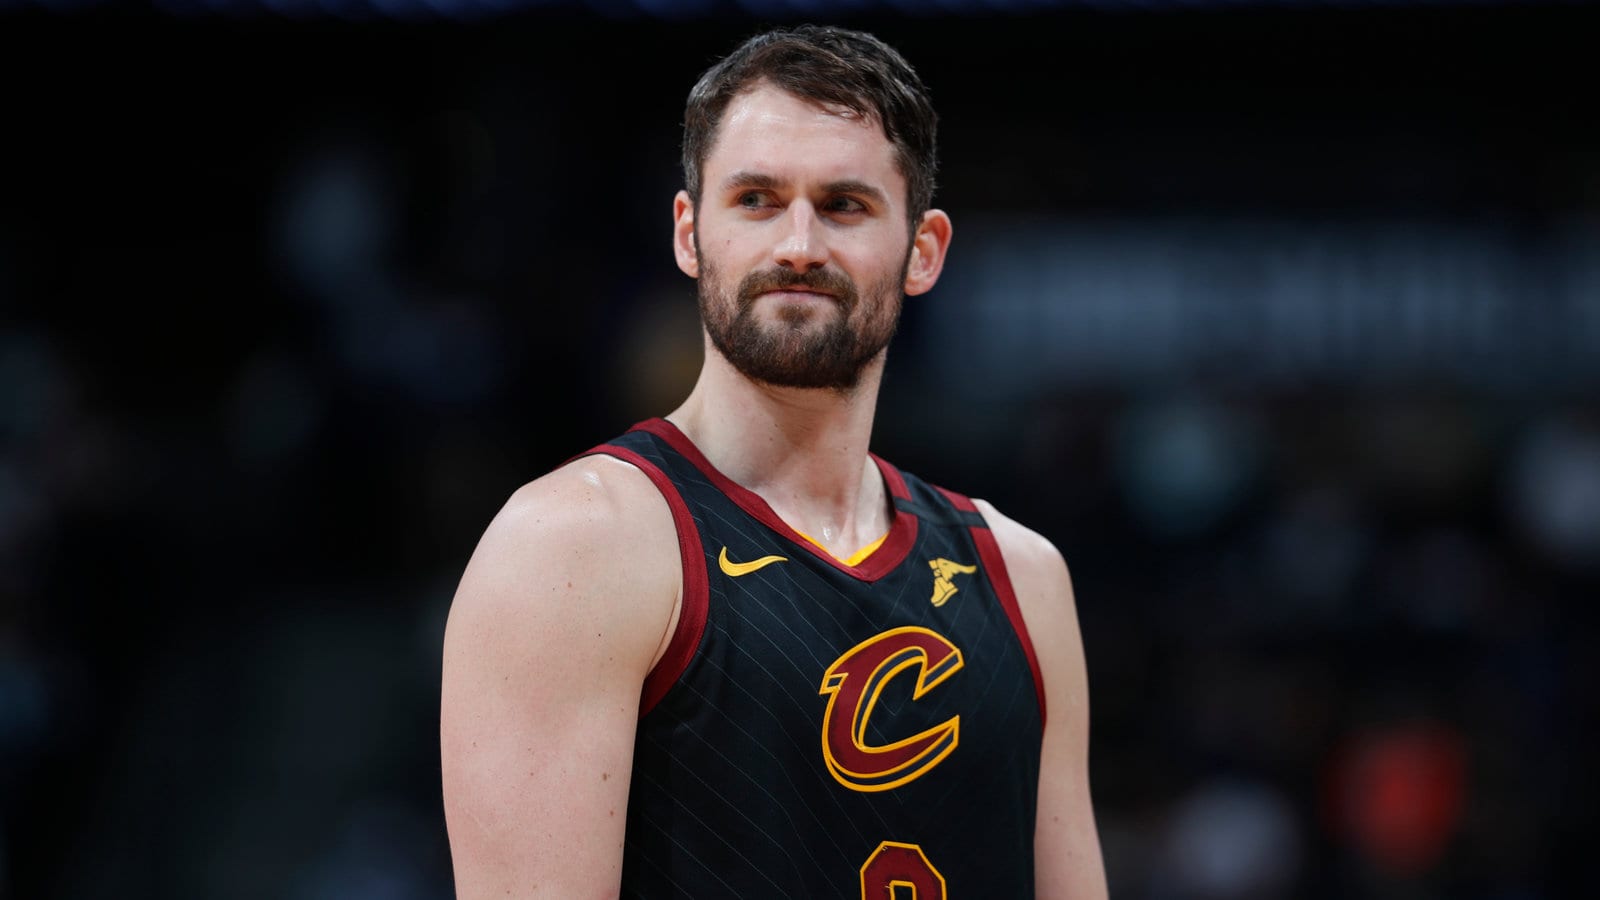 Kevin Love of the Cavaliers